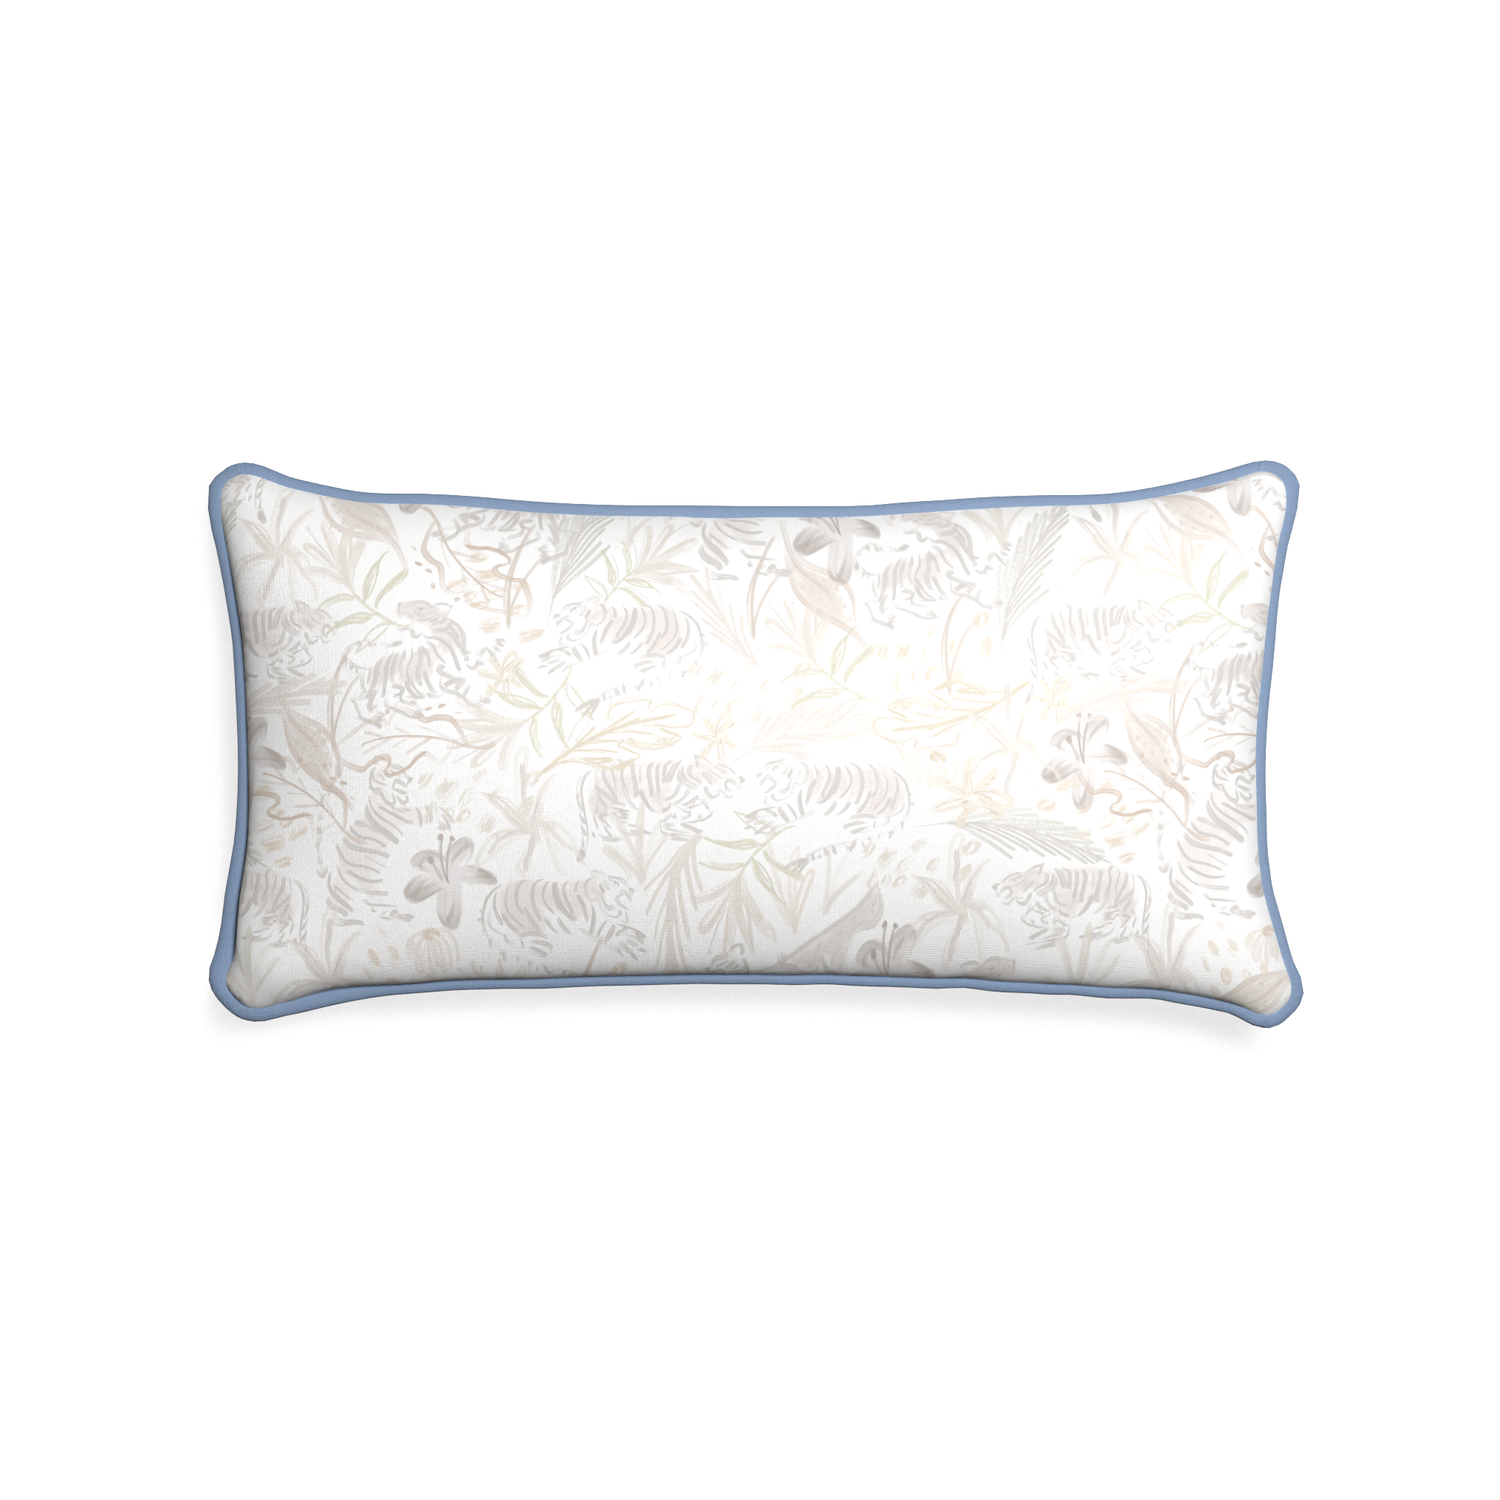 Midi-lumbar frida sand custom beige chinoiserie tigerpillow with sky piping on white background